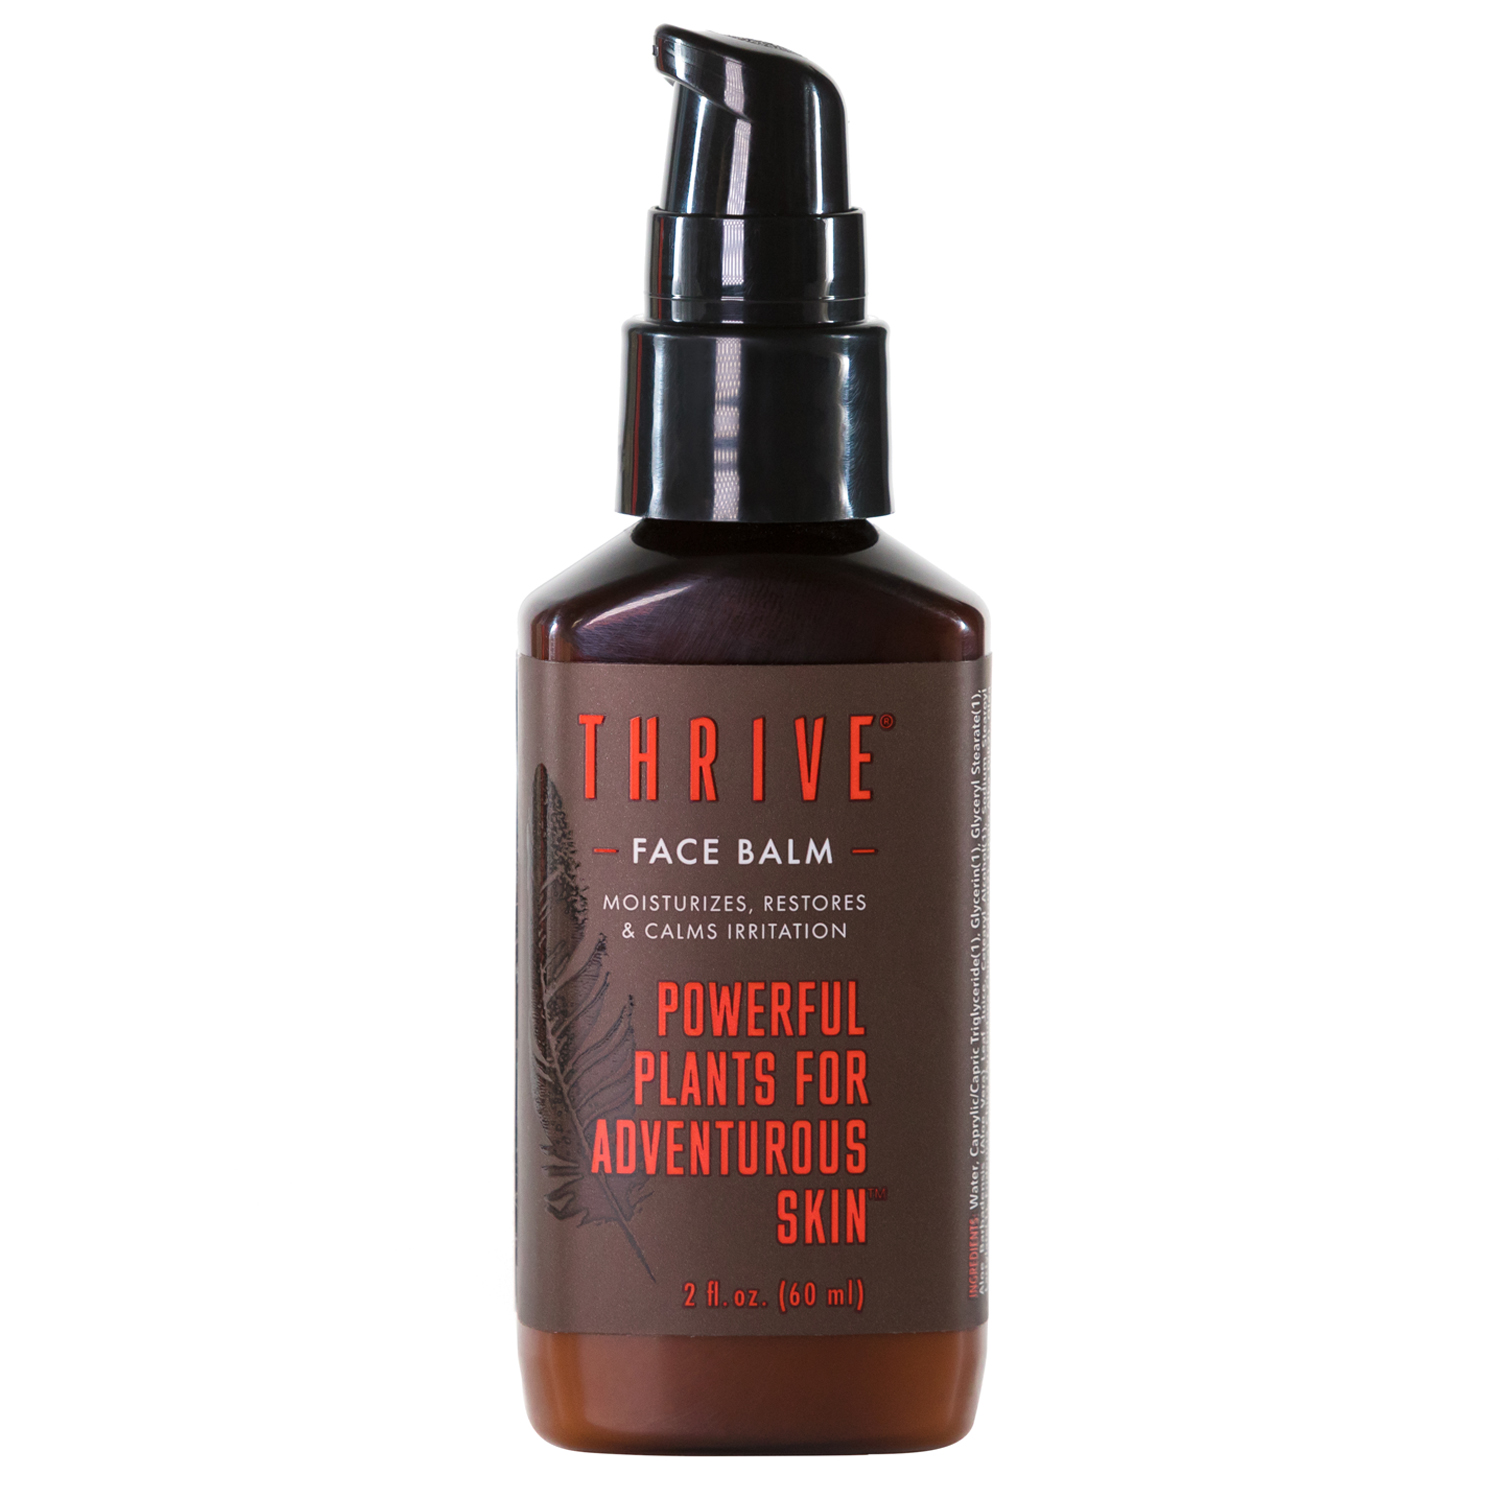 Face Balm by Thrive Natural Care (60ml Balm) - image 1 of 7